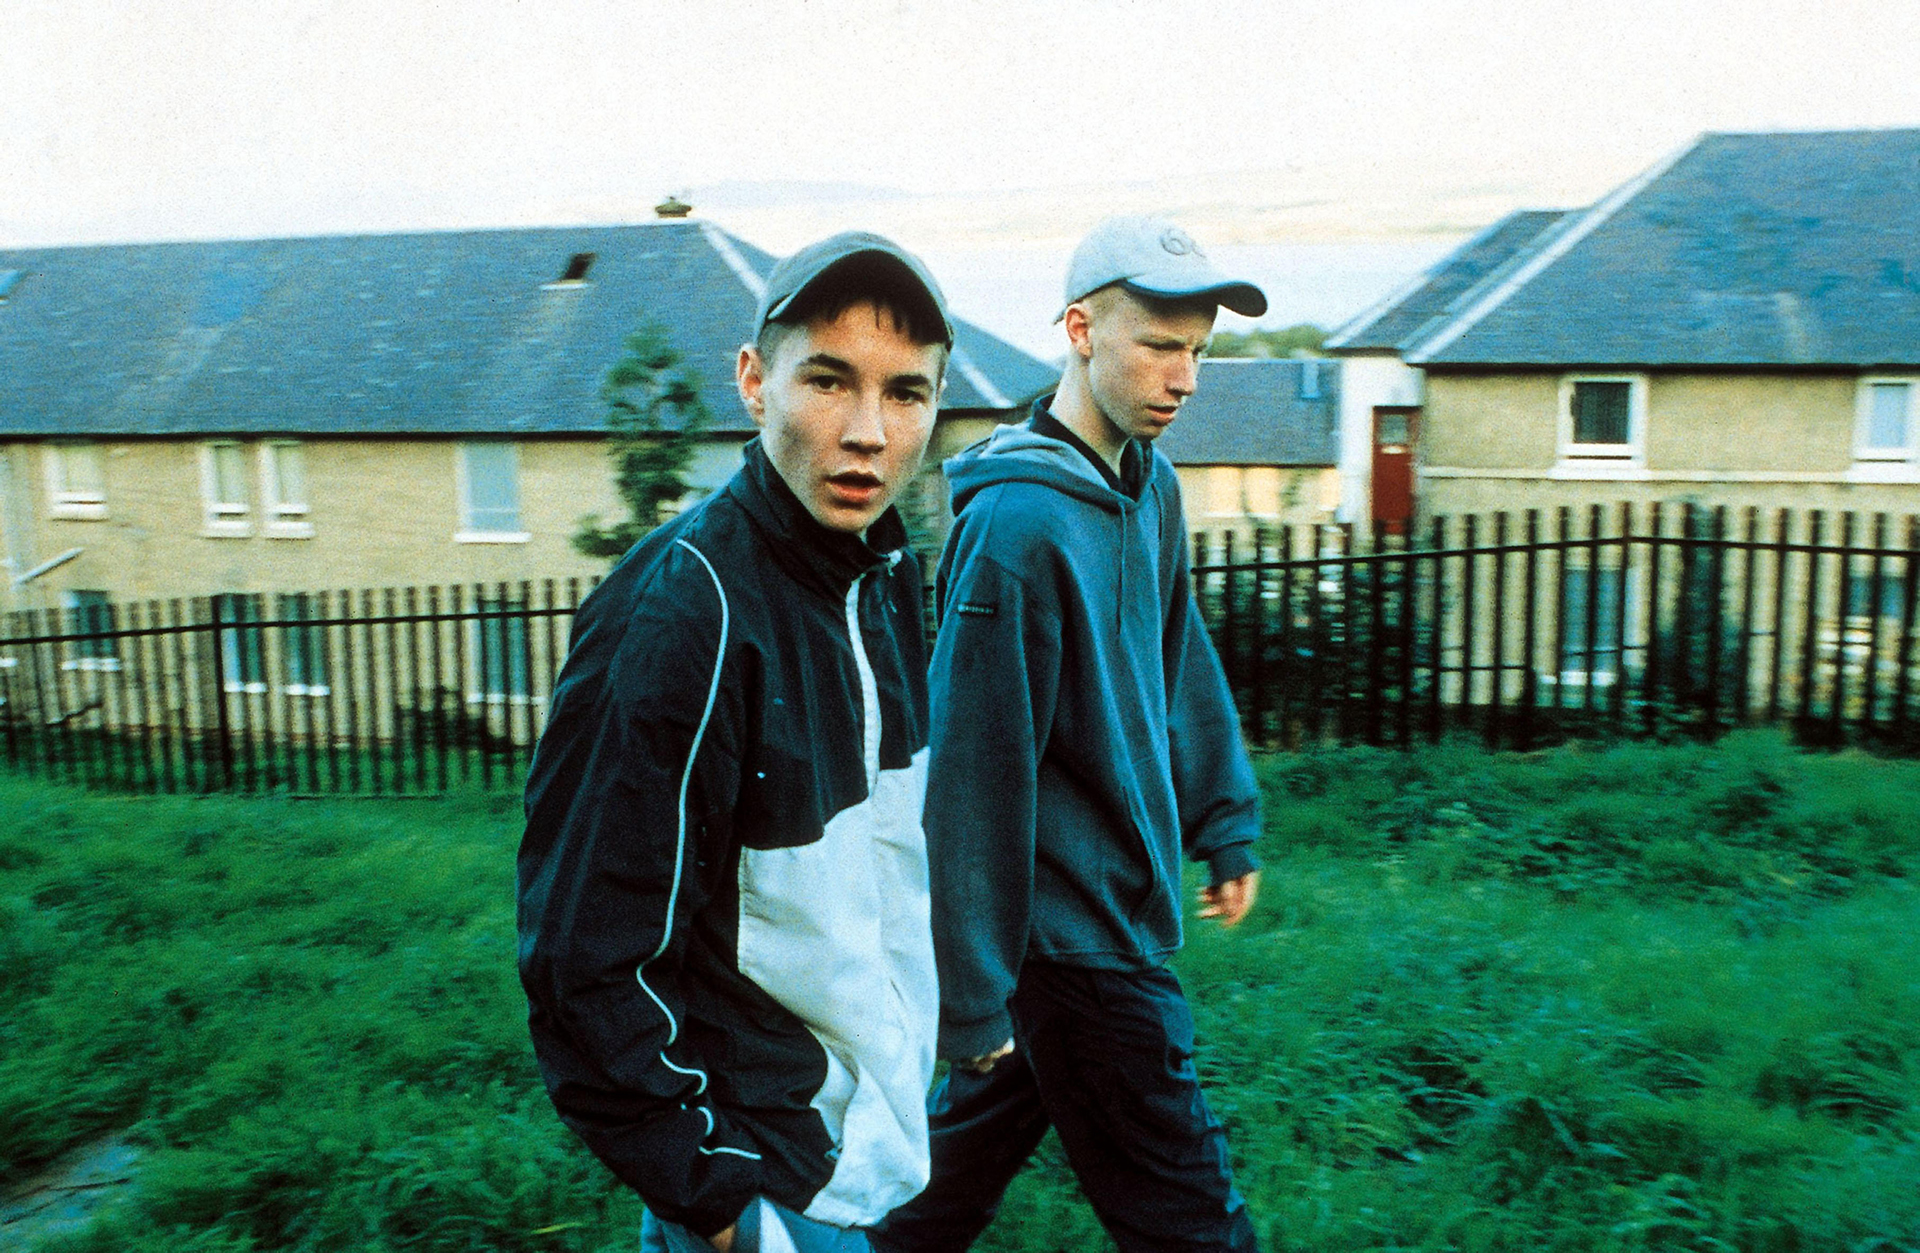 Martin Compston and William Ruane in Sweet Sixteen